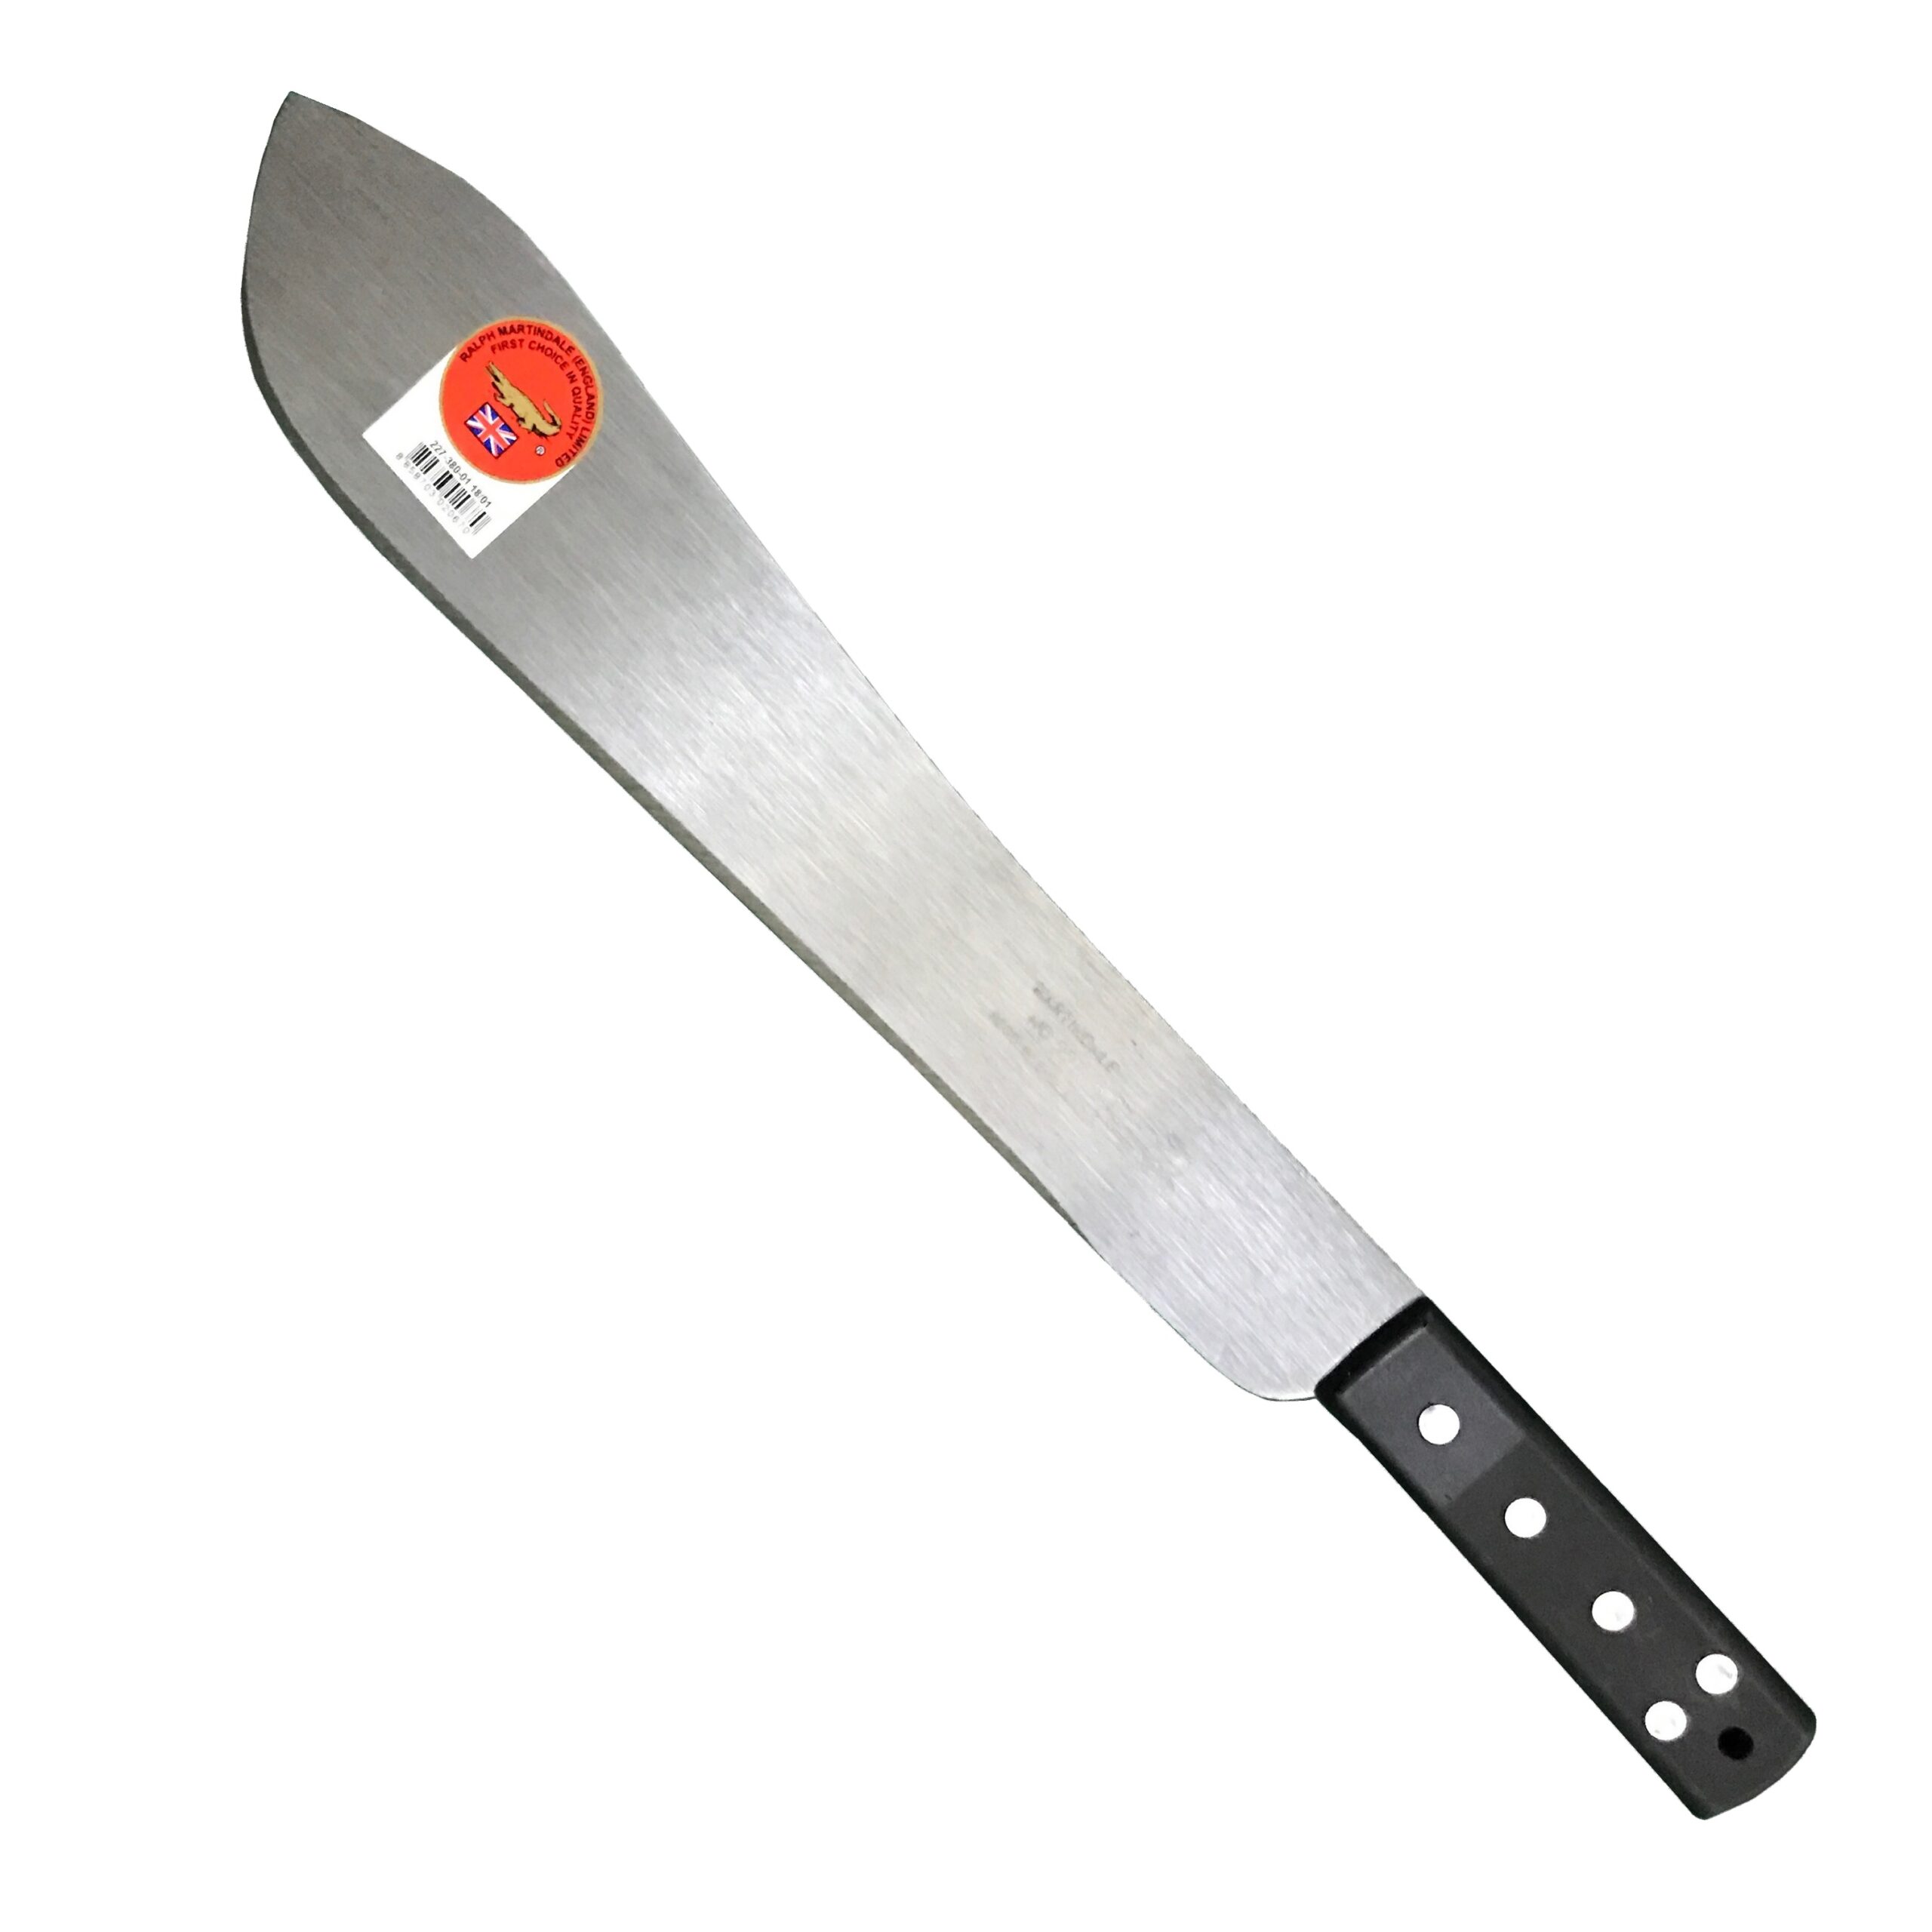 Martindale 15 inch Bolo Cleaver w/ High-Impact Plastic Handle